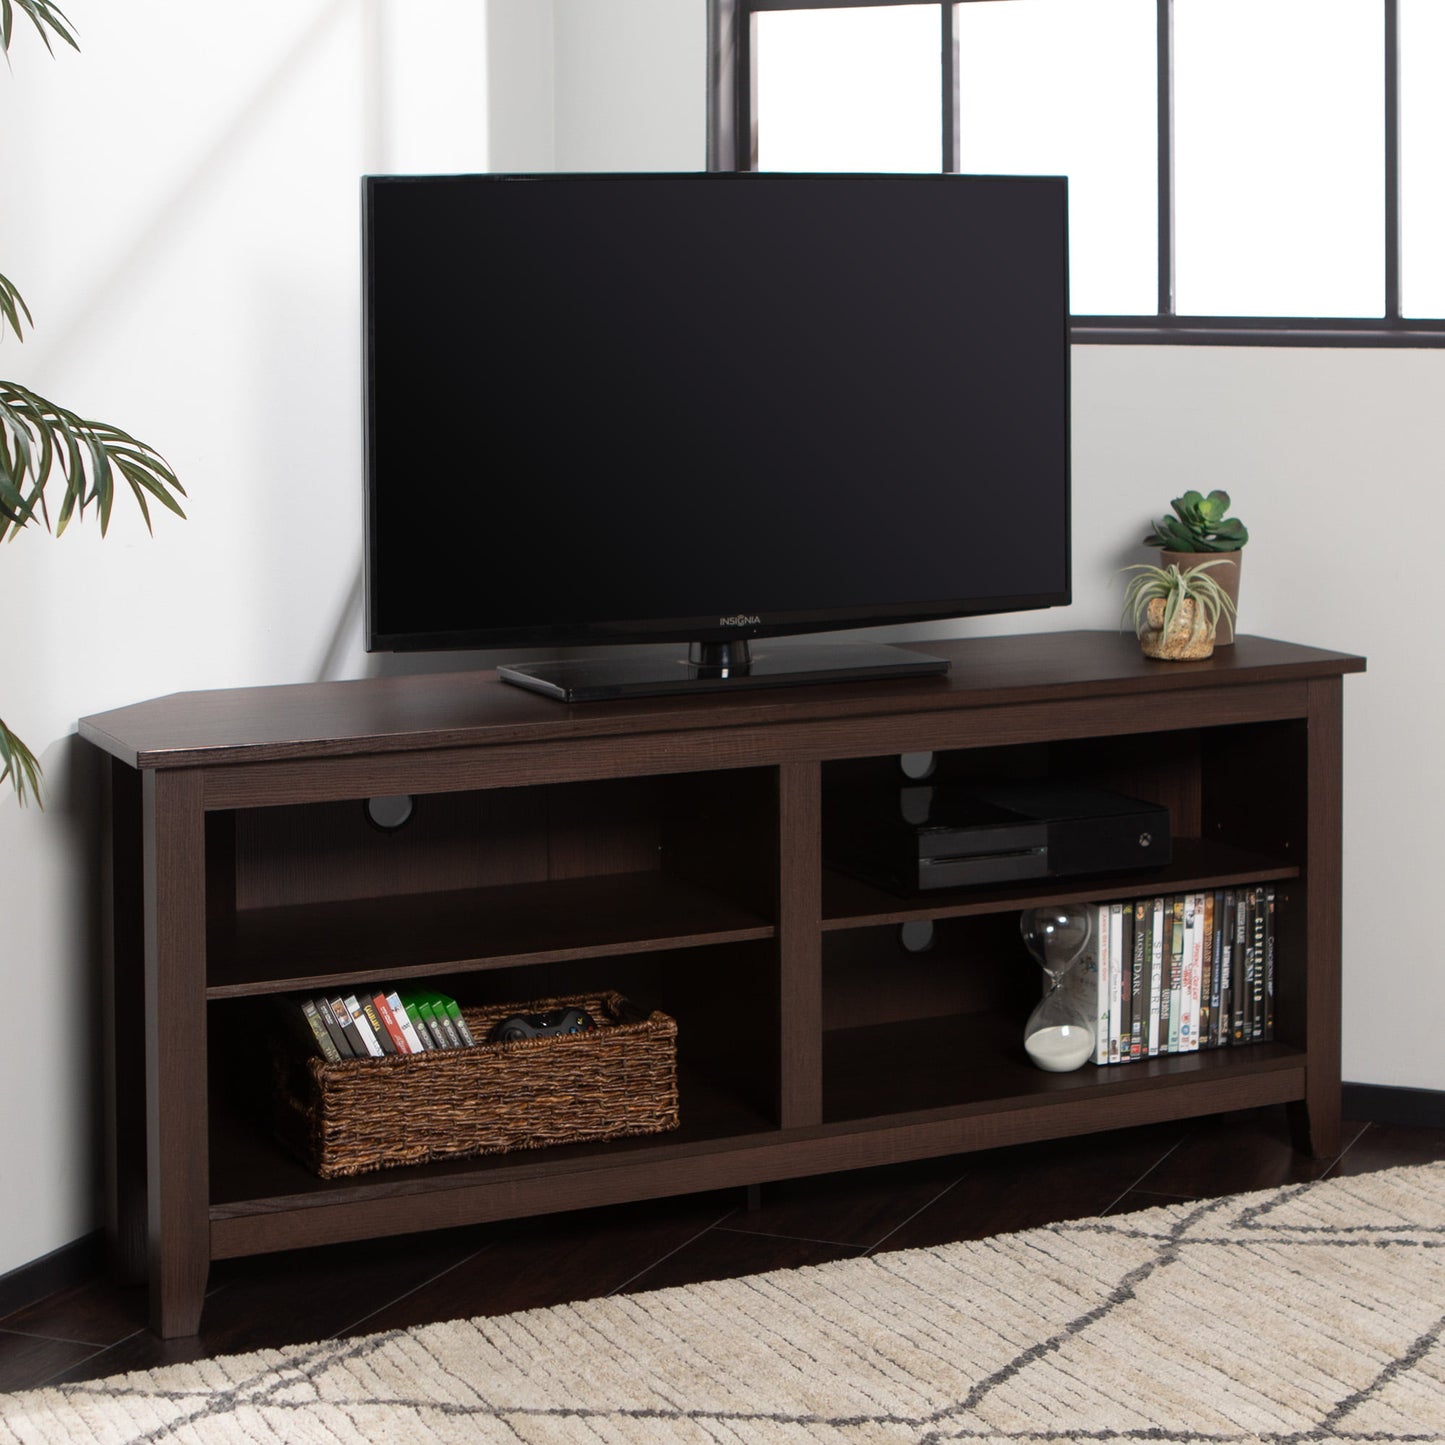 Woven Paths Farmhouse Corner TV Stand for TVs up to 65", Espresso